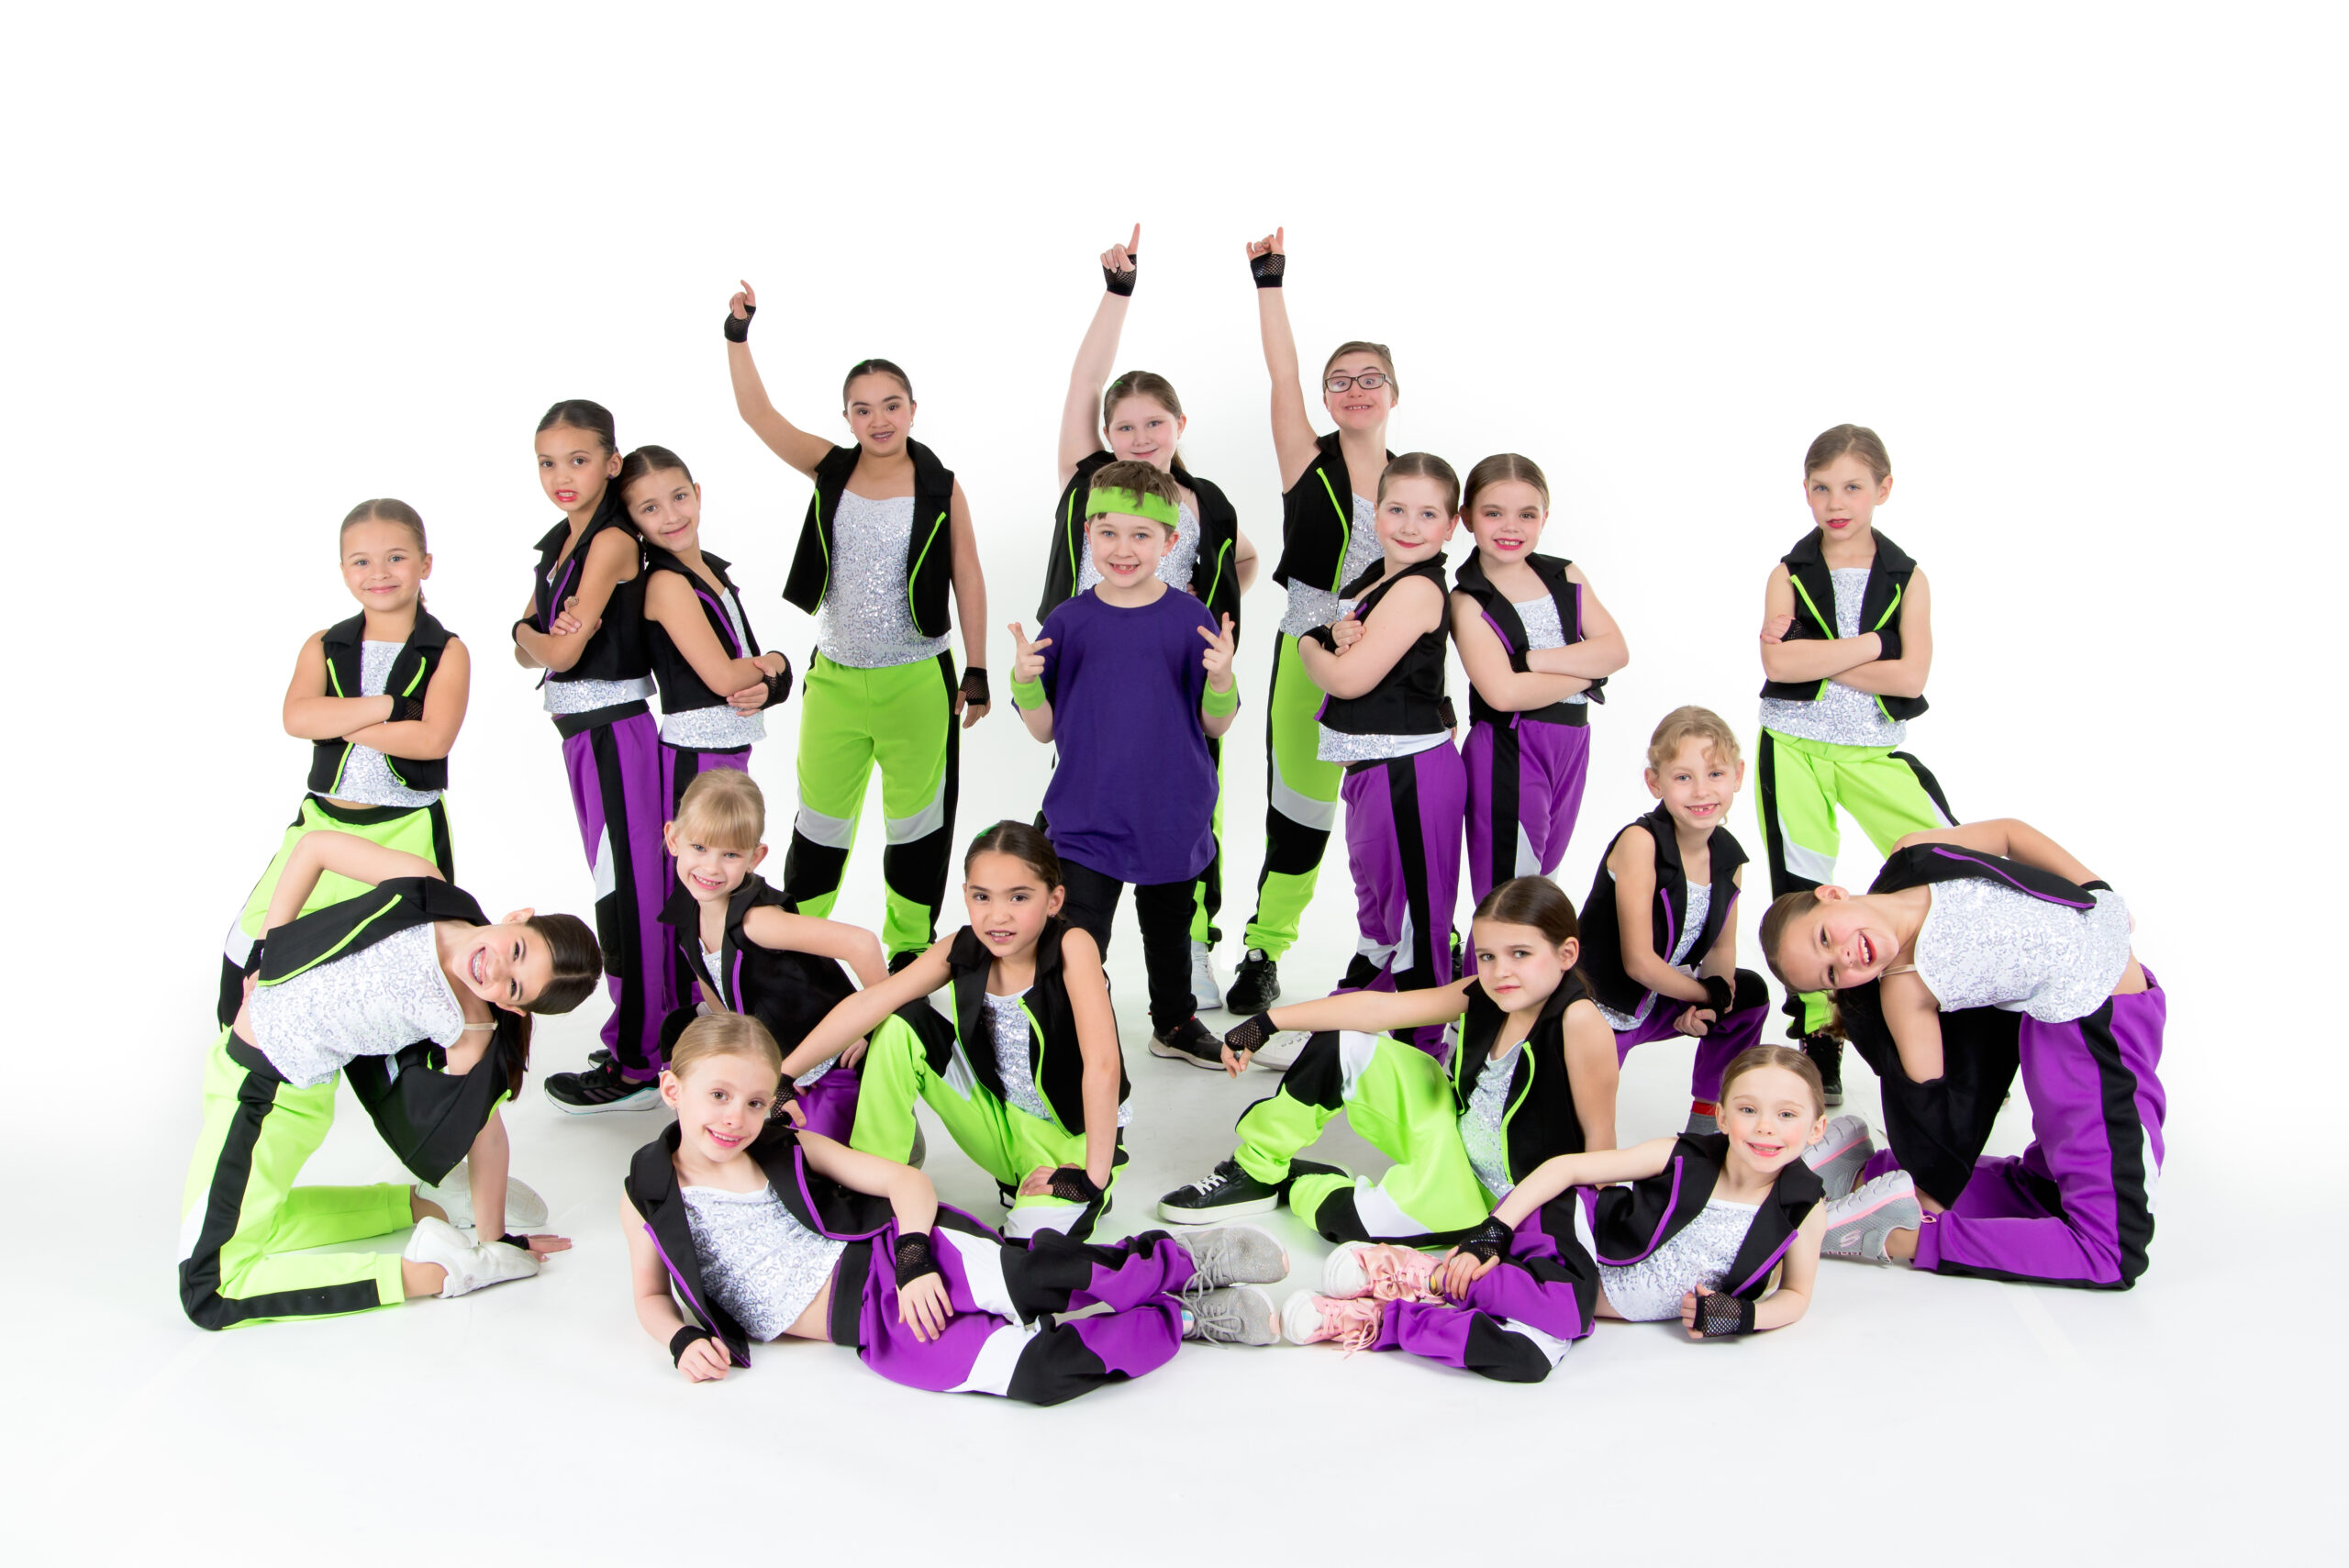 Our petite hip hop dancers posed in green and purple.